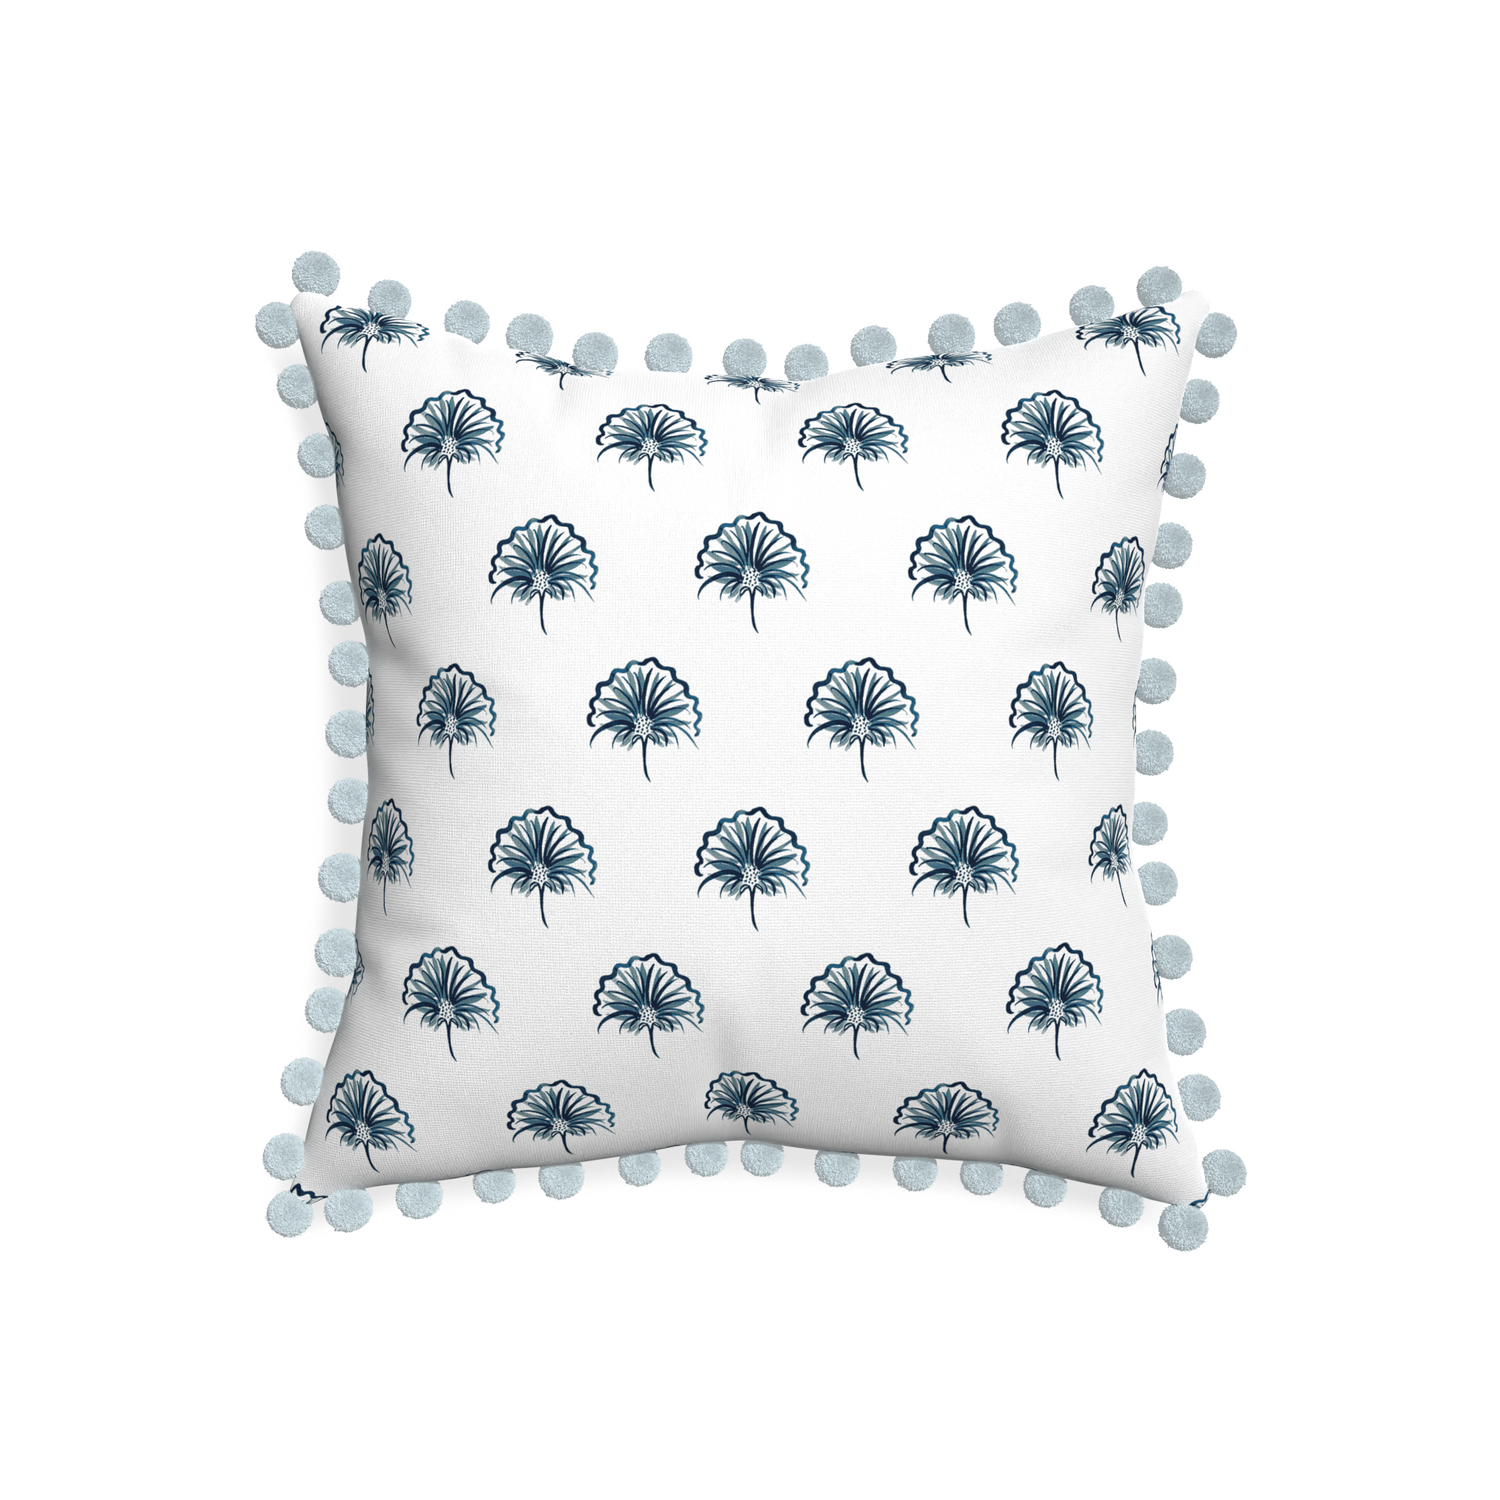 20-square penelope midnight custom floral navypillow with powder pom pom on white background